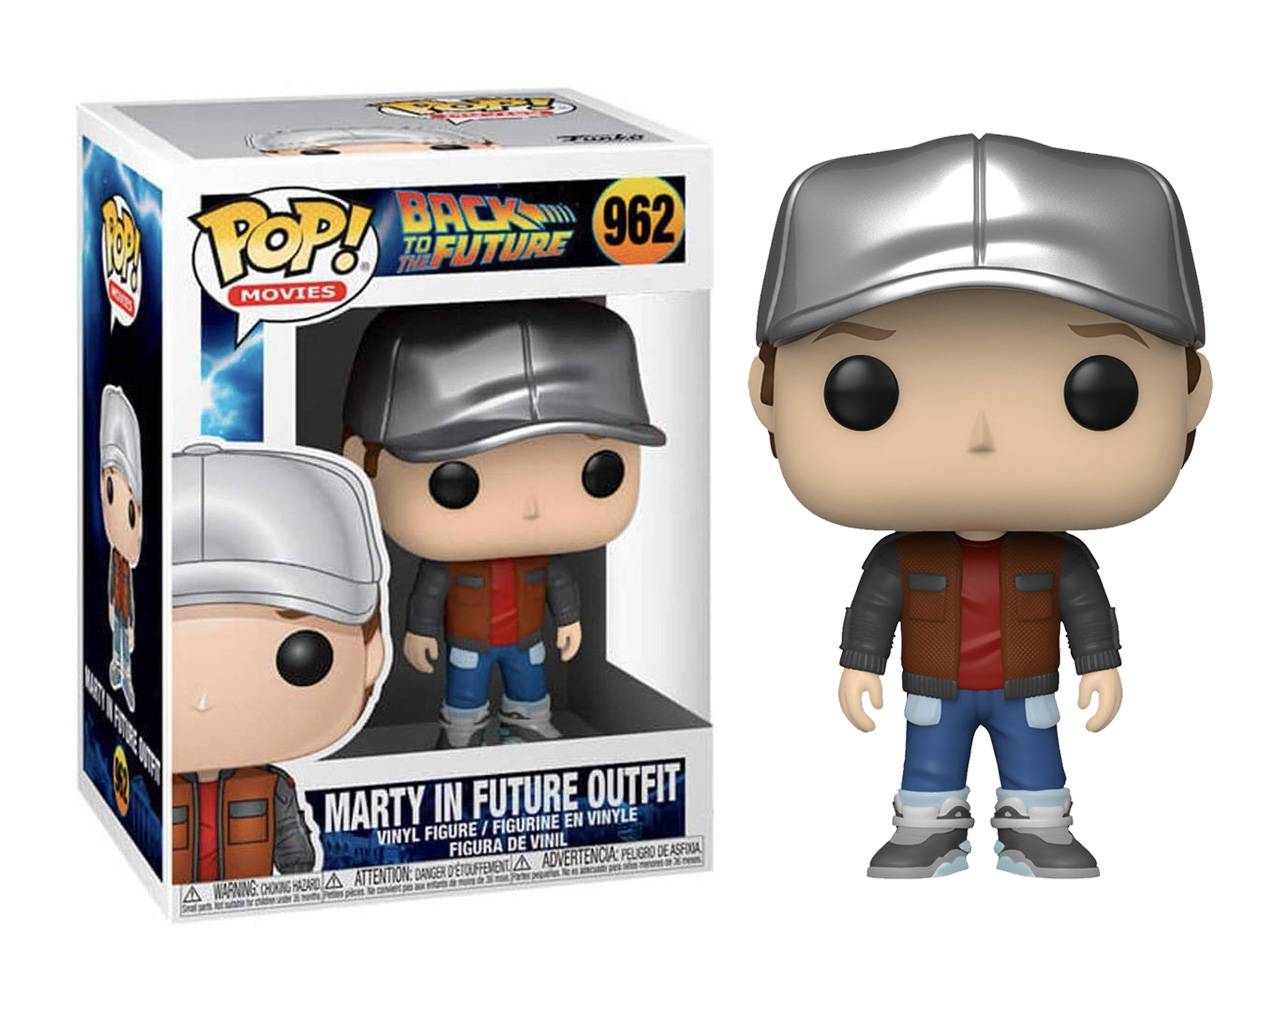 Marty McFly in Future Outfit - Back to the Future Pop! Vinyl